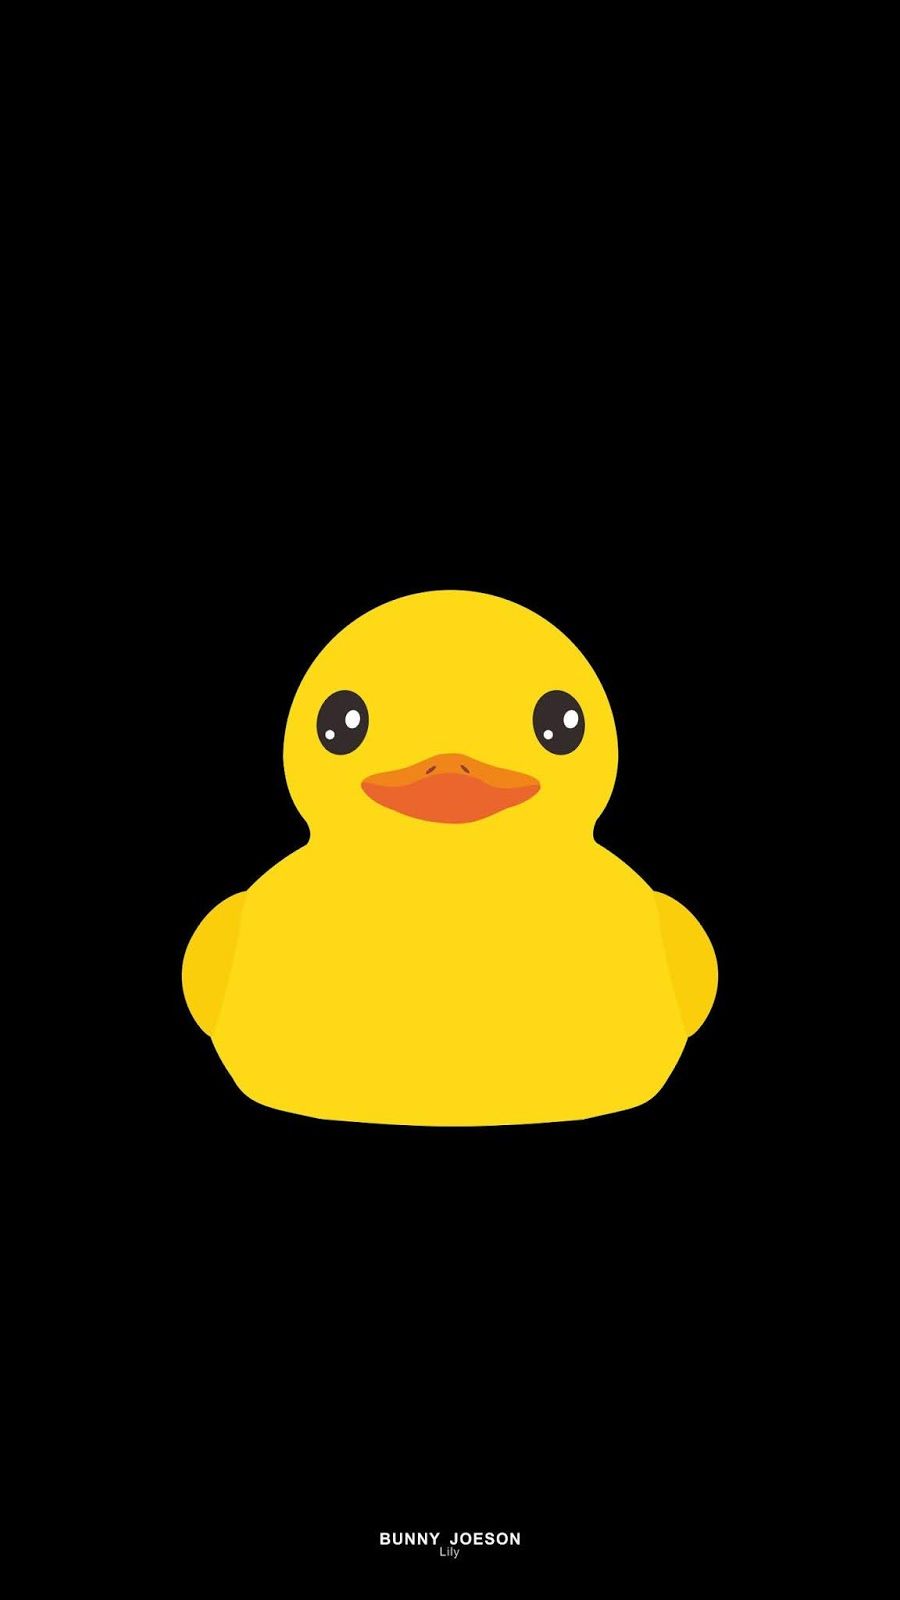 Rubber Duck Wallpaper with black background. HD Wallpaper For Your Mobile & PC